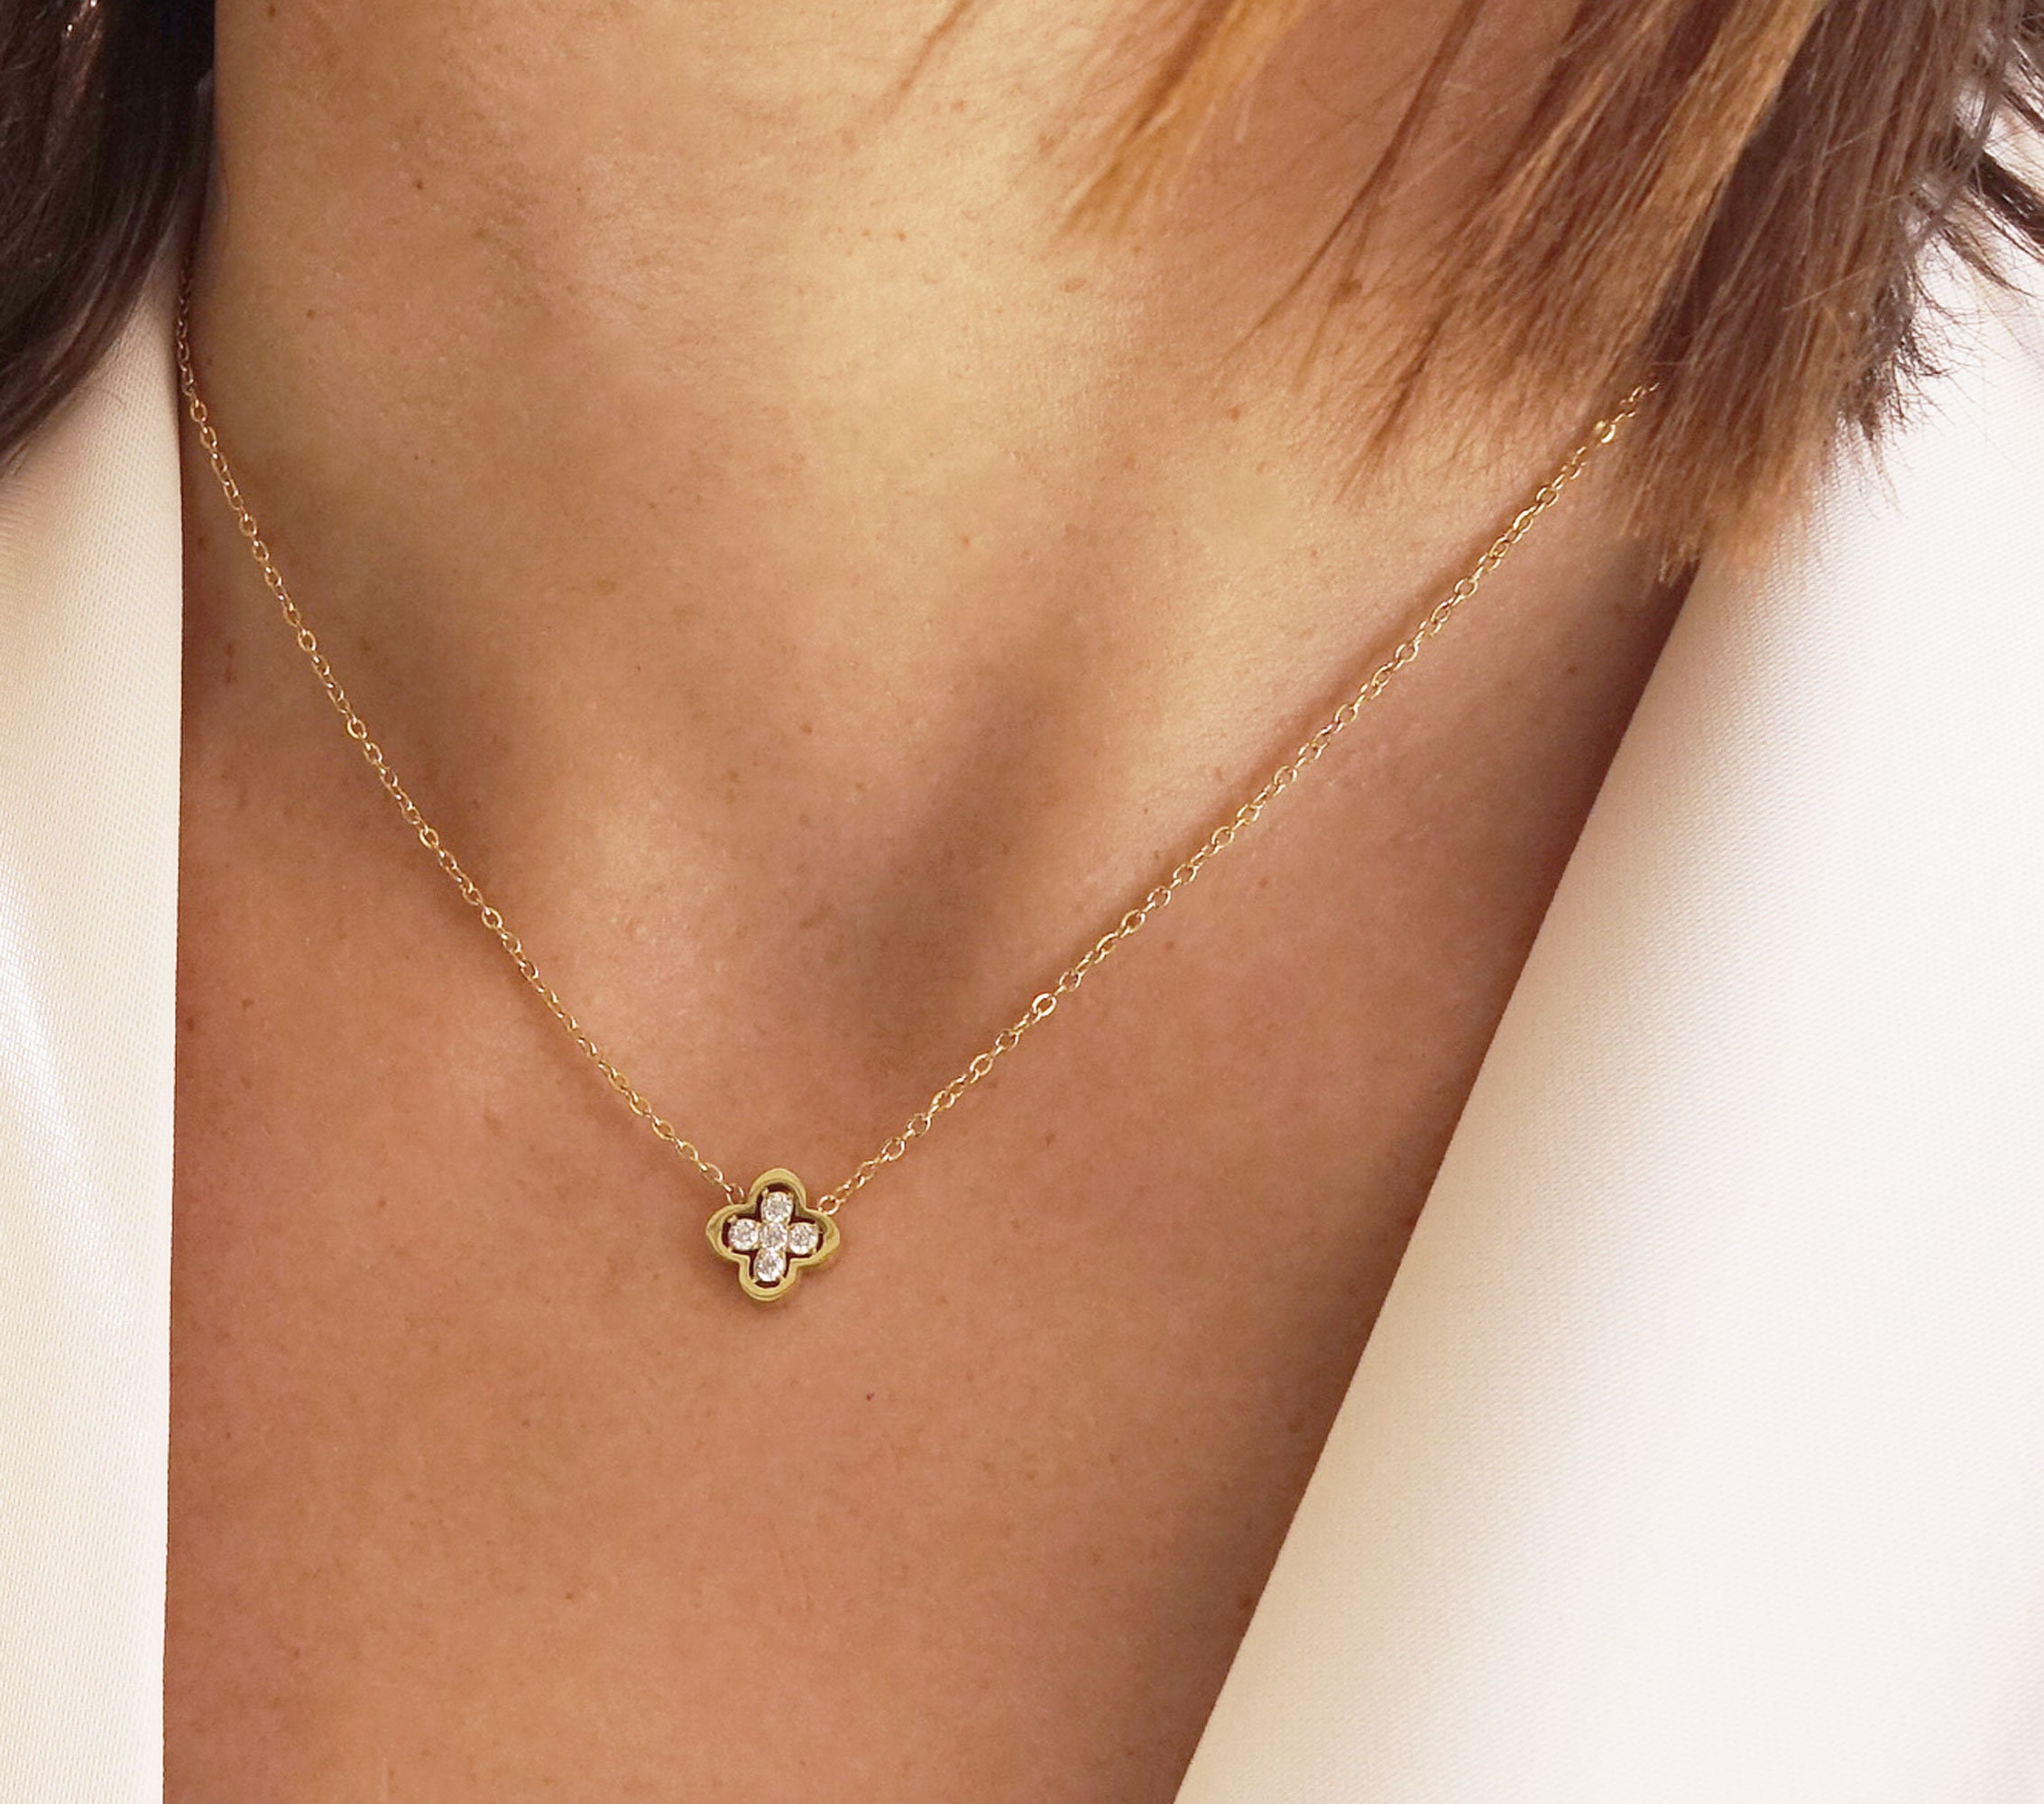 Dainty Stainless Steel Clover Crystal Necklace